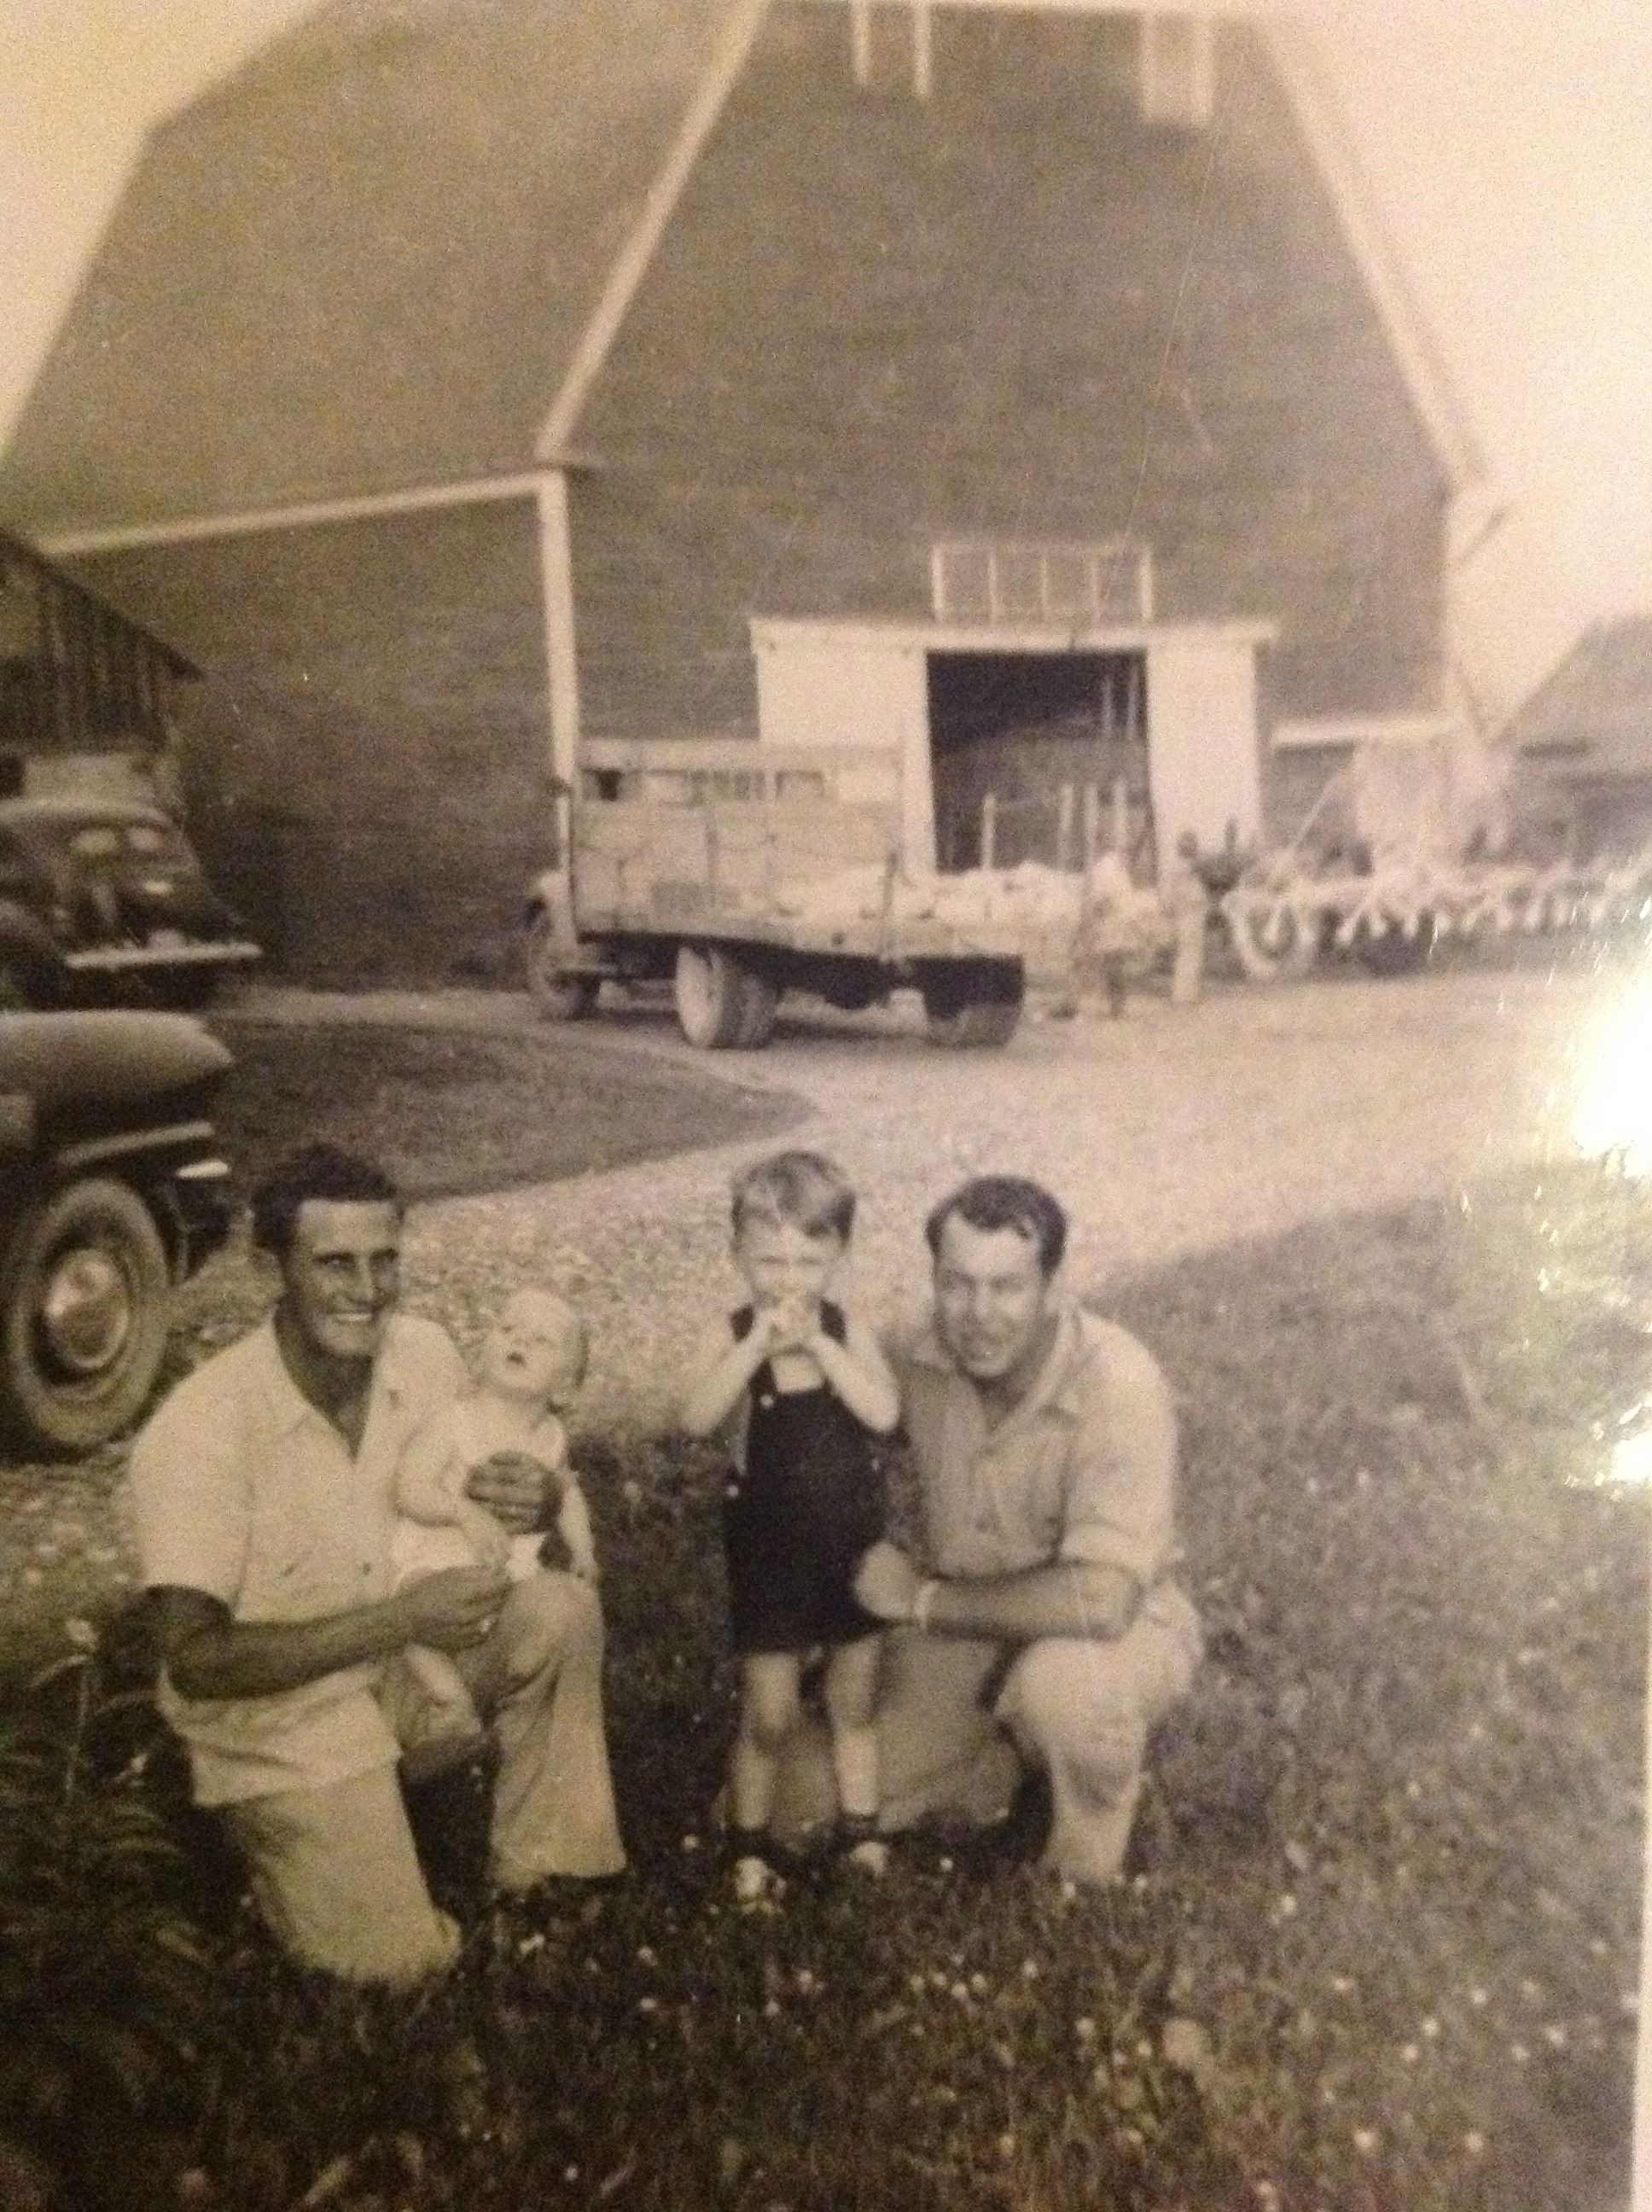 Throwback Thursday – Summer in Aroostook 1947…& More Overalls